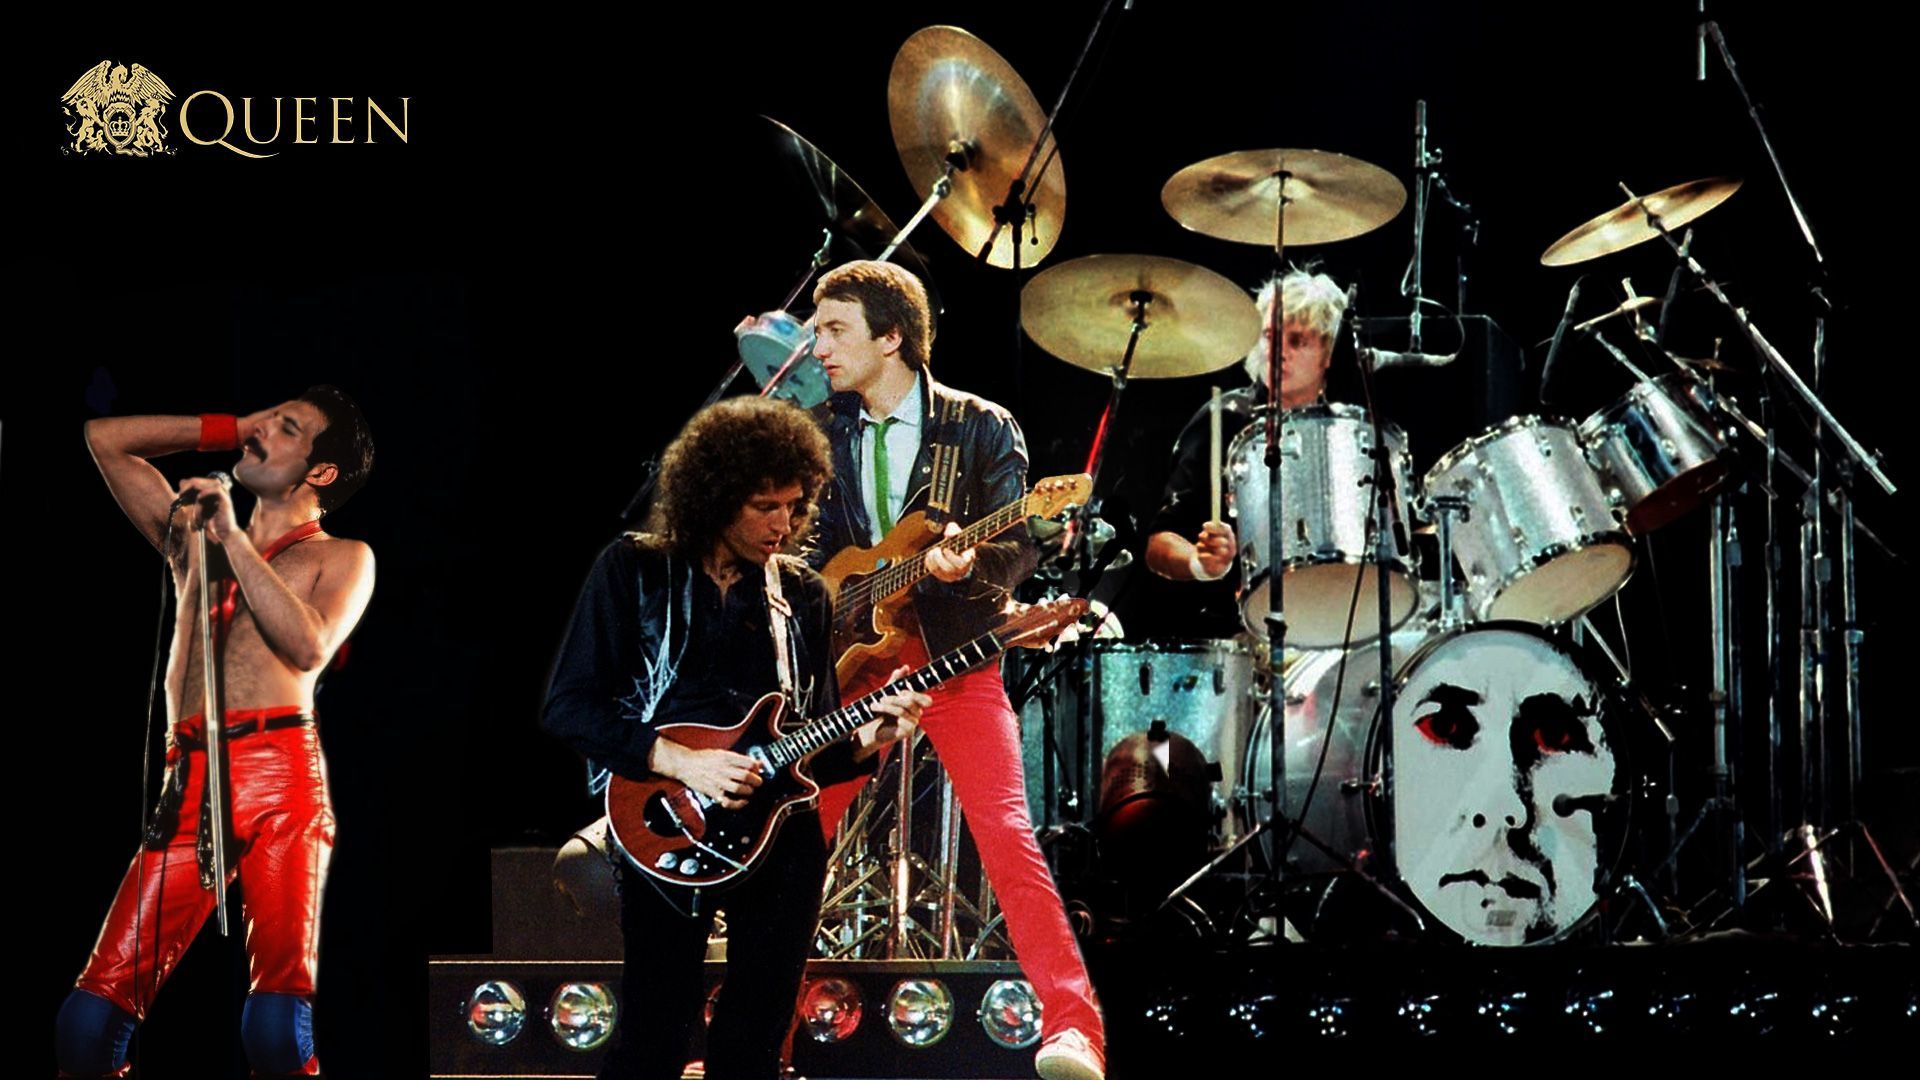 Queen Band Background